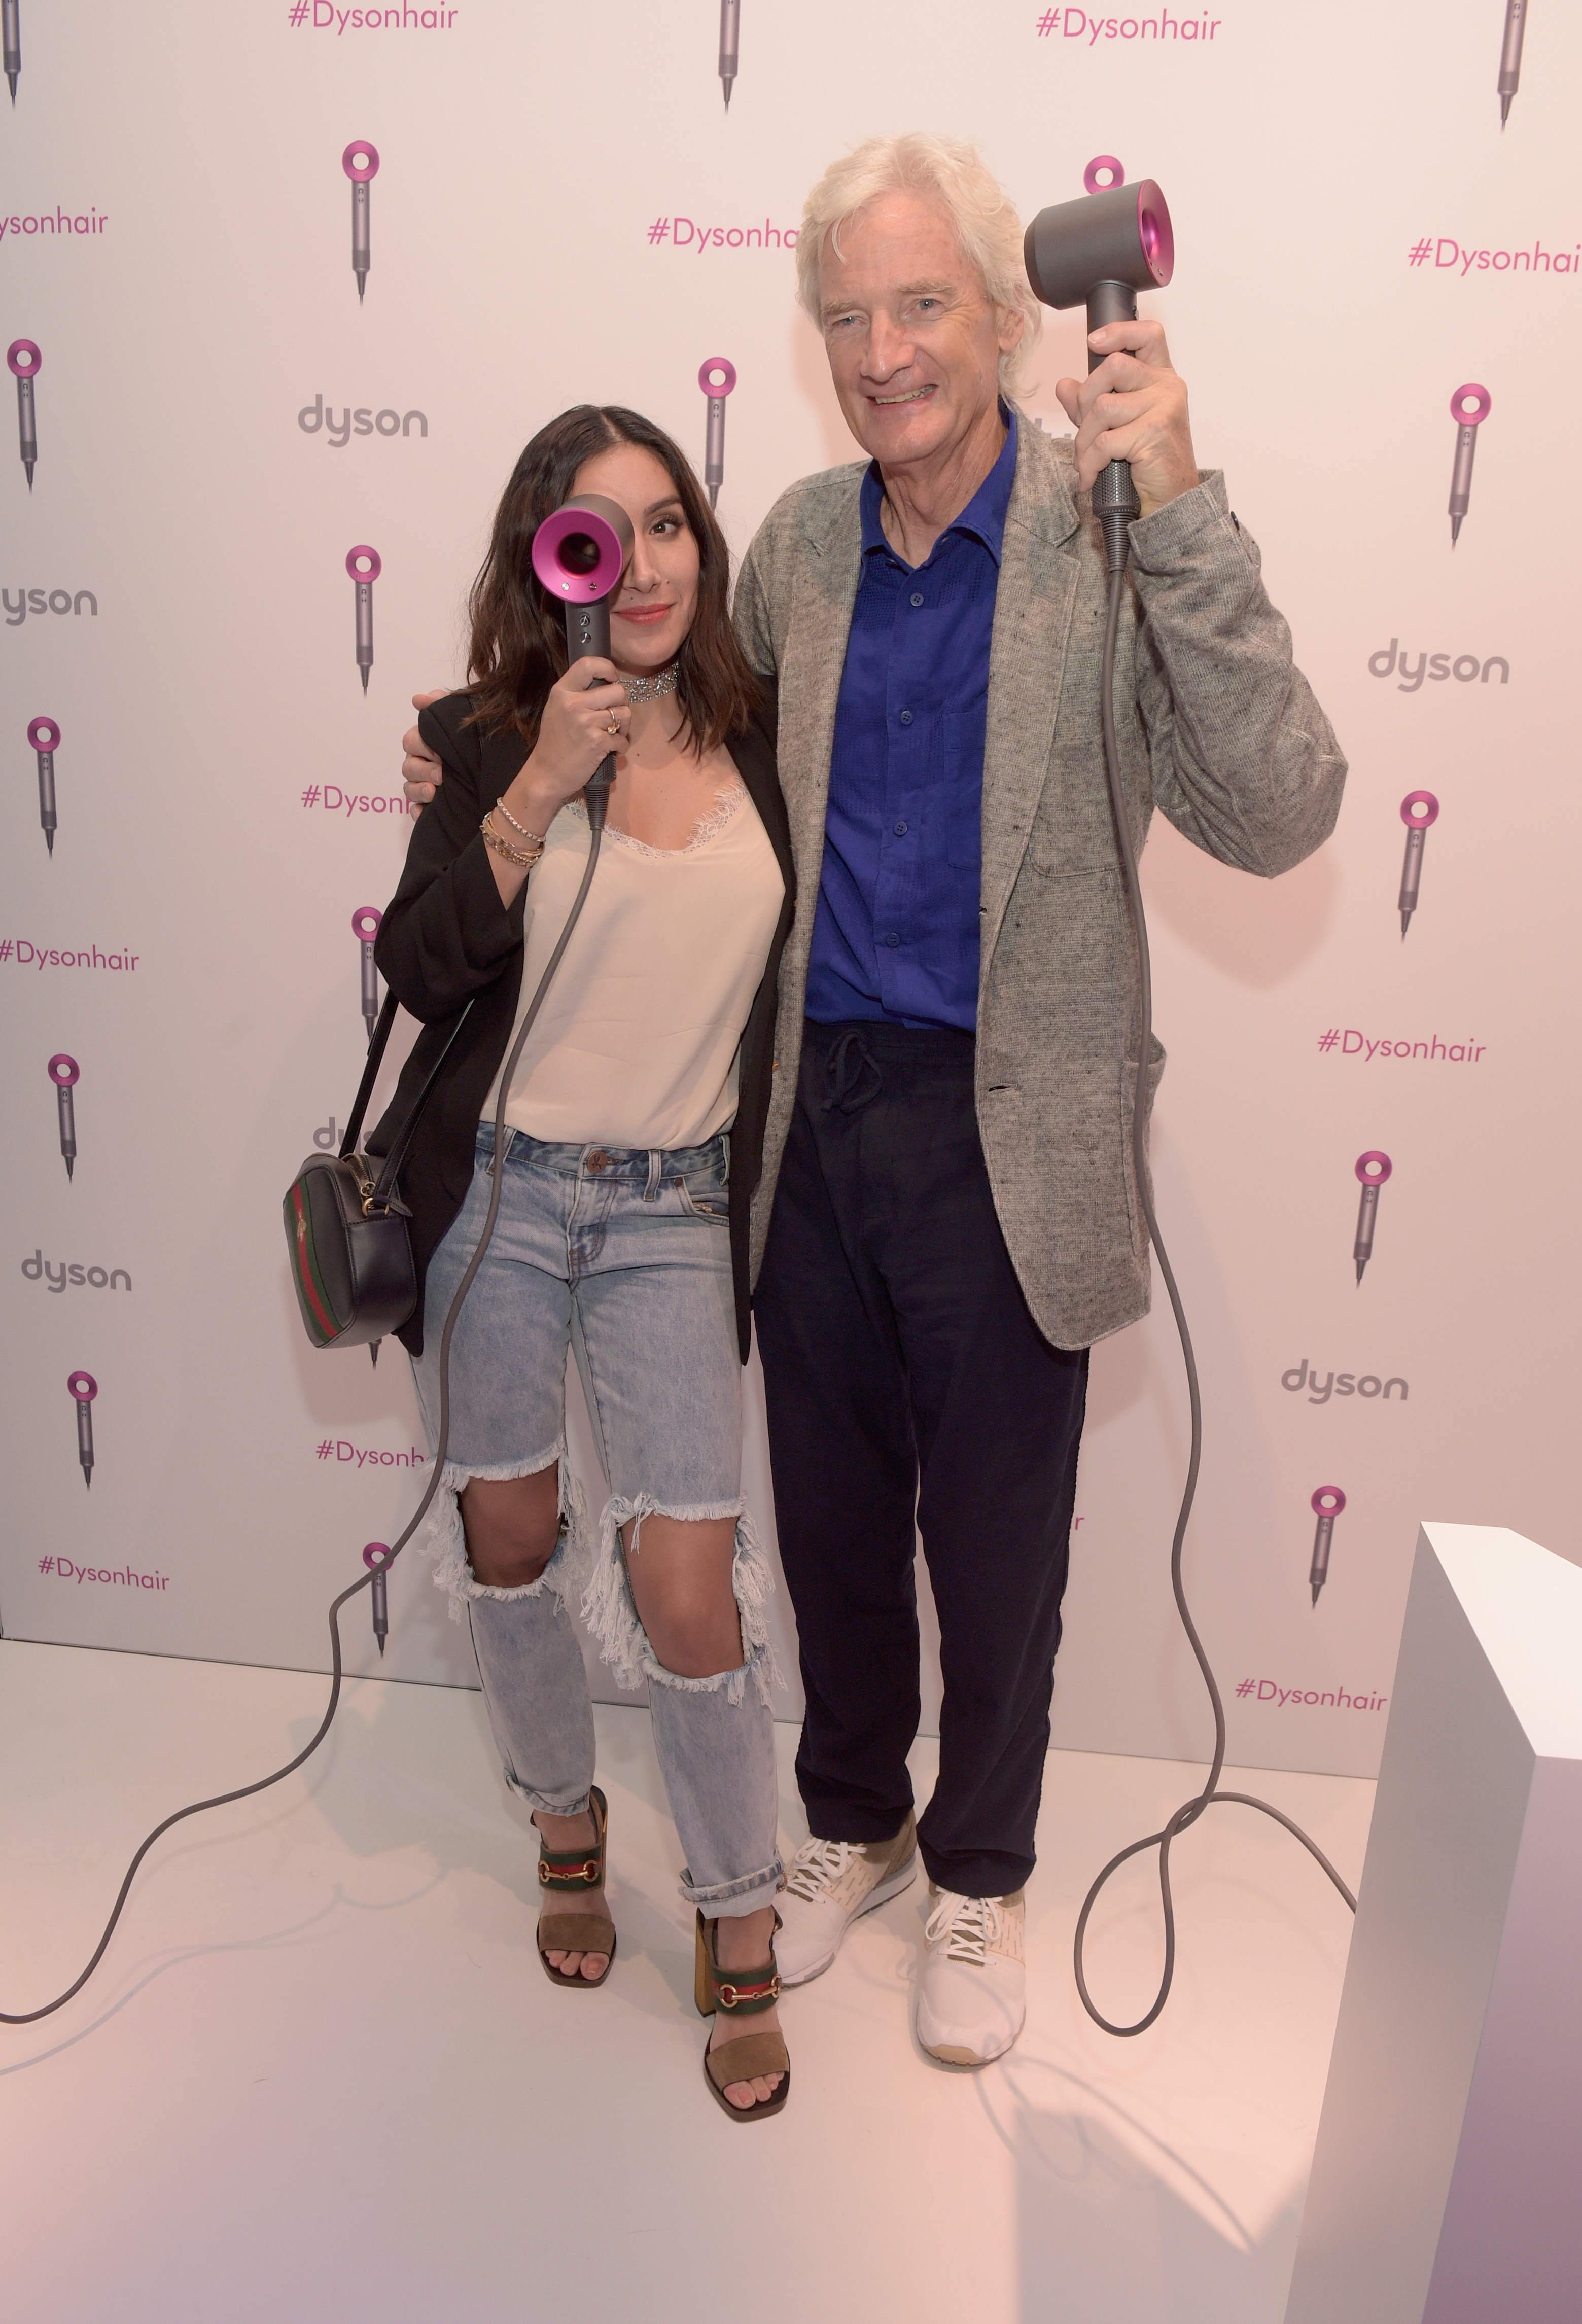 Dyson Supersonic ambassador Jen Atkin and Dyson founder and chief engineer Sir James Dyson attend the Dyson Supersonic Hair Dryer launch event at Center548 on September 14, 2016 in New York City. 